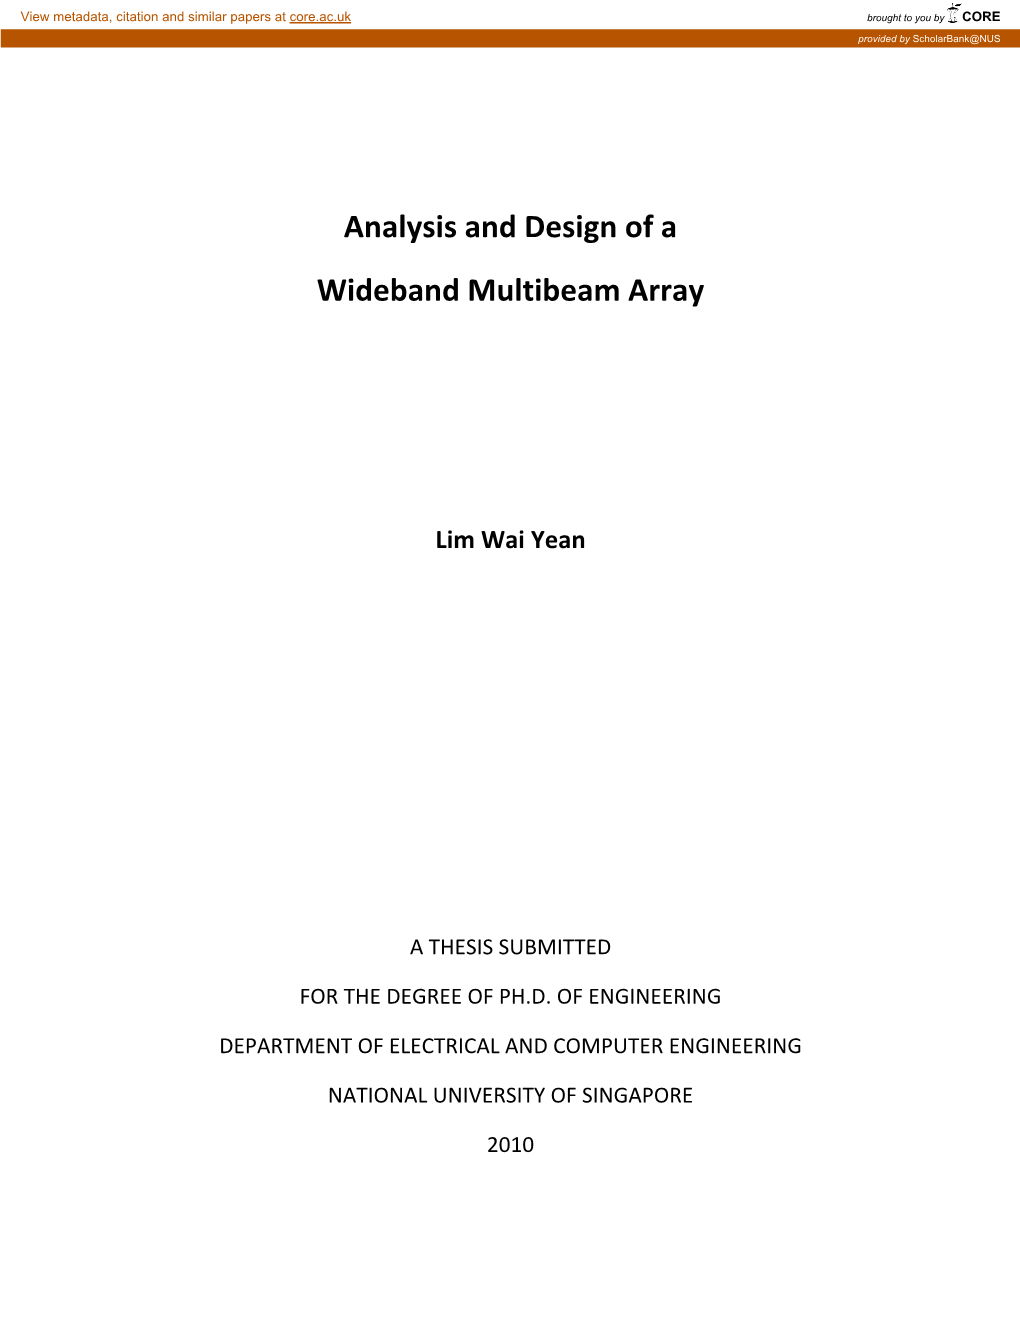 Analysis and Design of a Wideband Multibeam Array